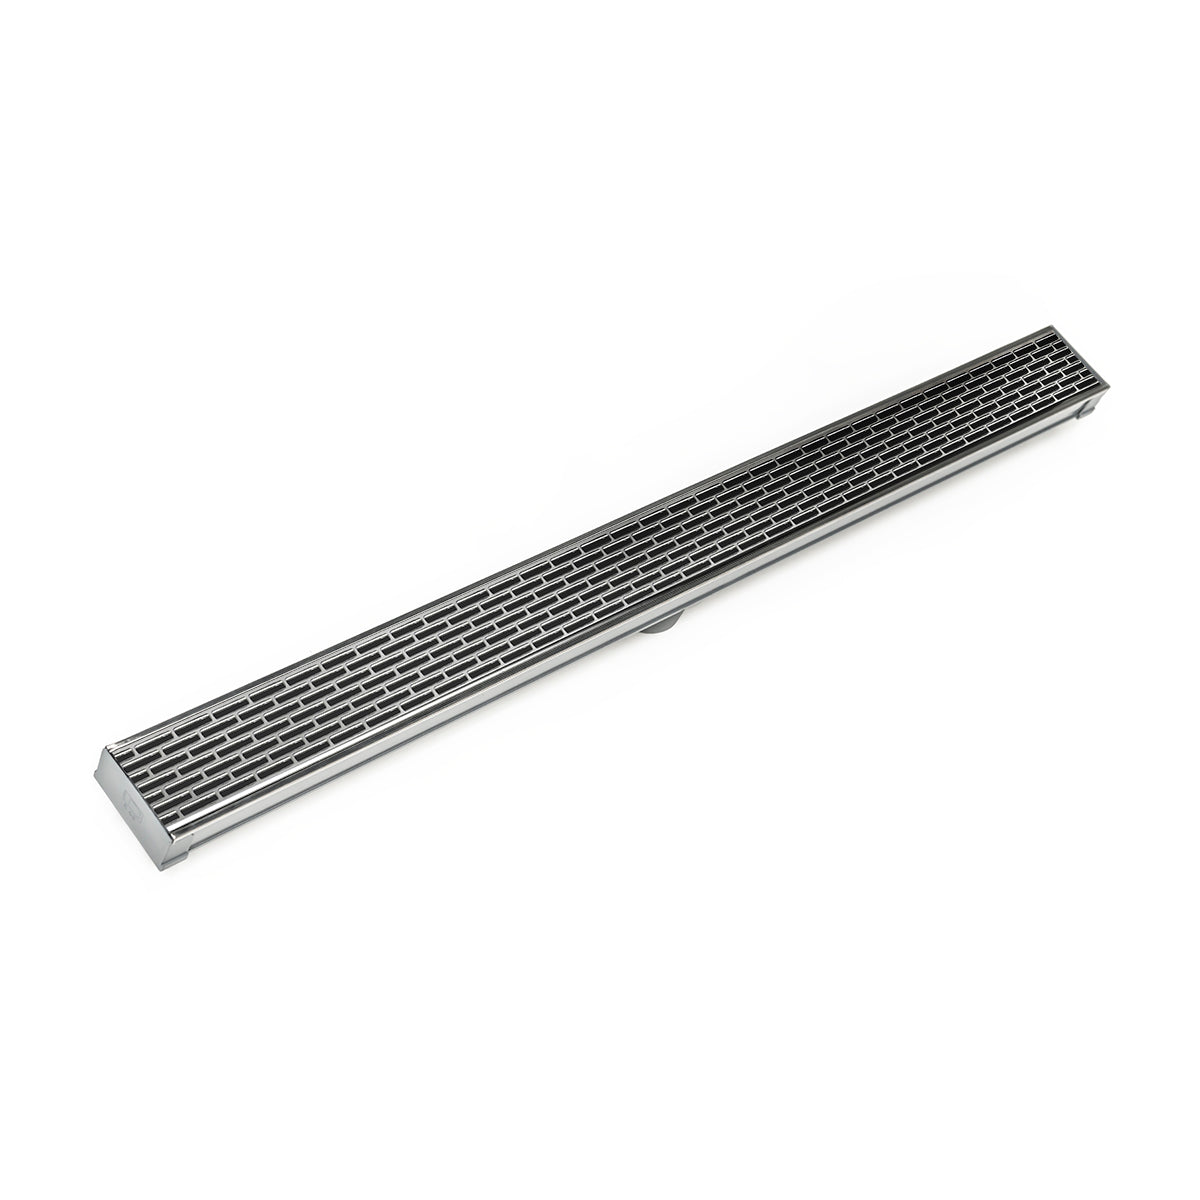 Infinity Drain 96" S-PVC Series Low Profile Site Sizable Linear Drain Kit with 2 1/2" Perforated Offset Slot Grate